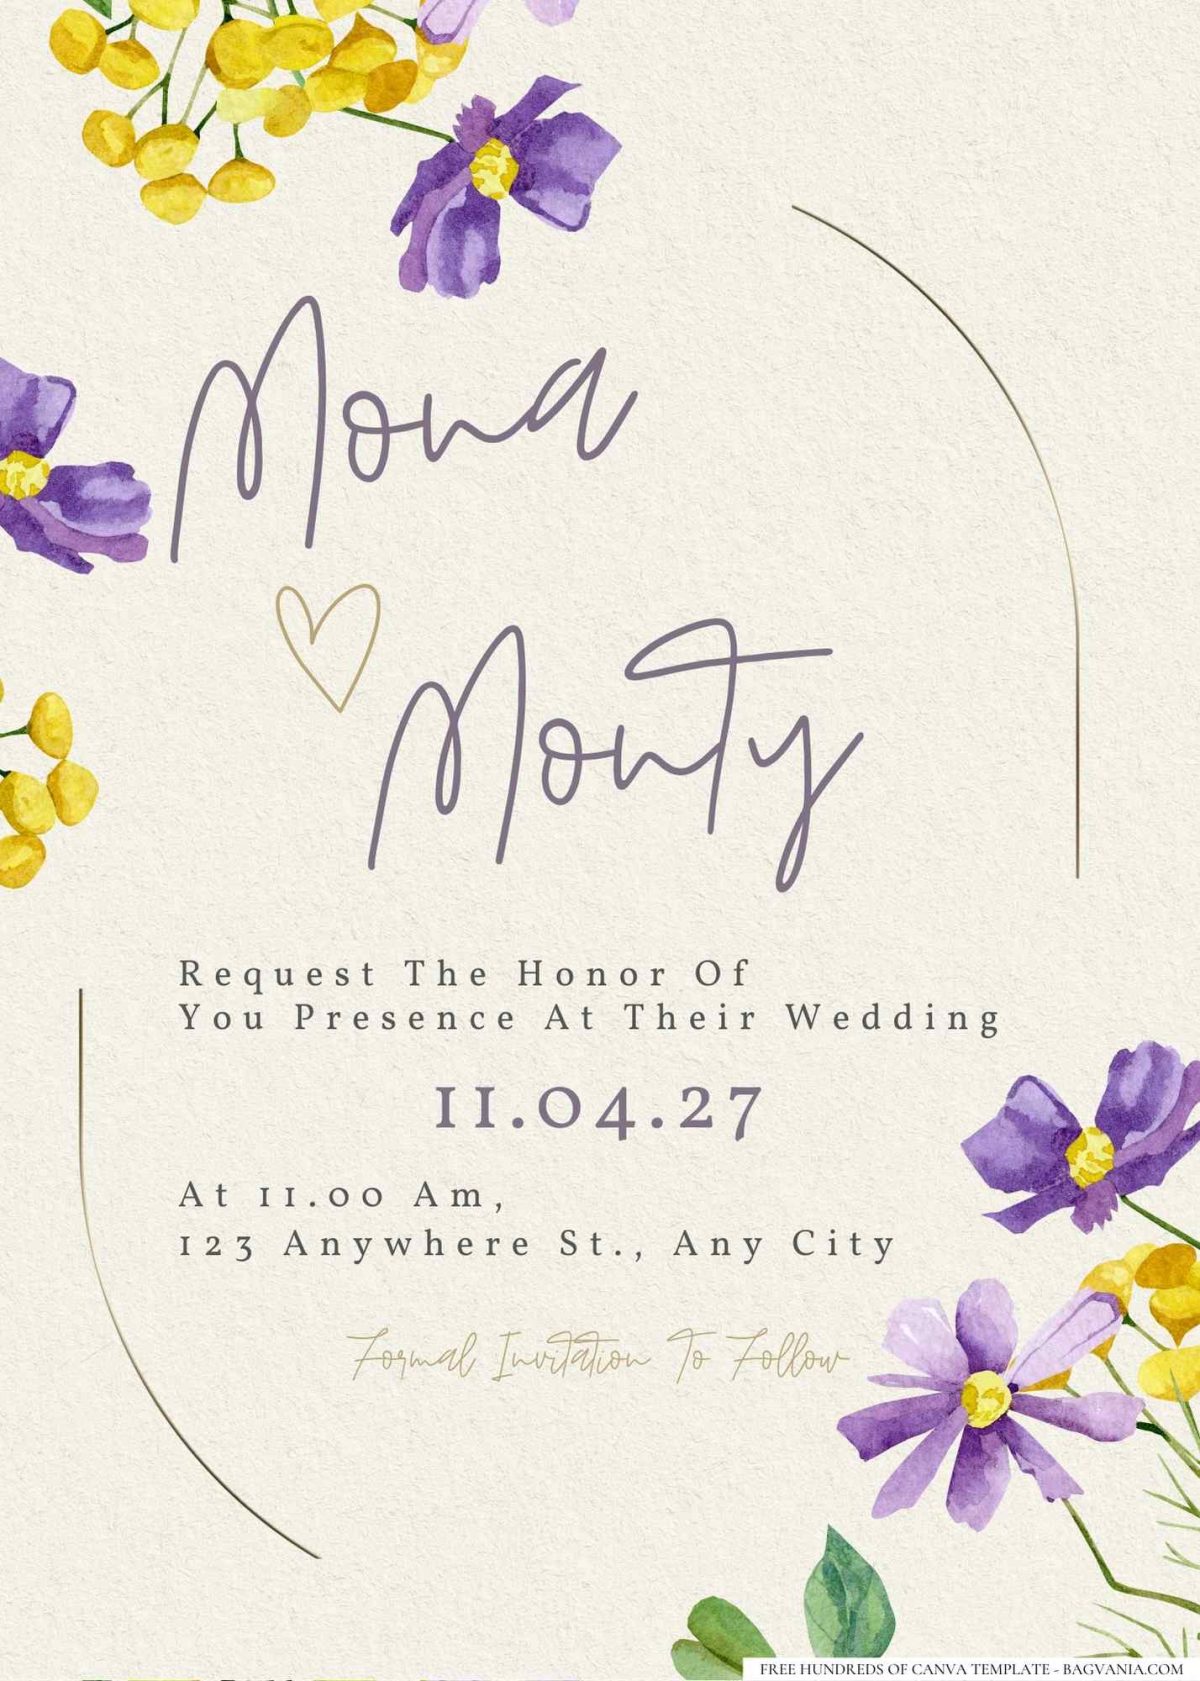 FREE Editable tropical floral with vibrant colors wedding invitation